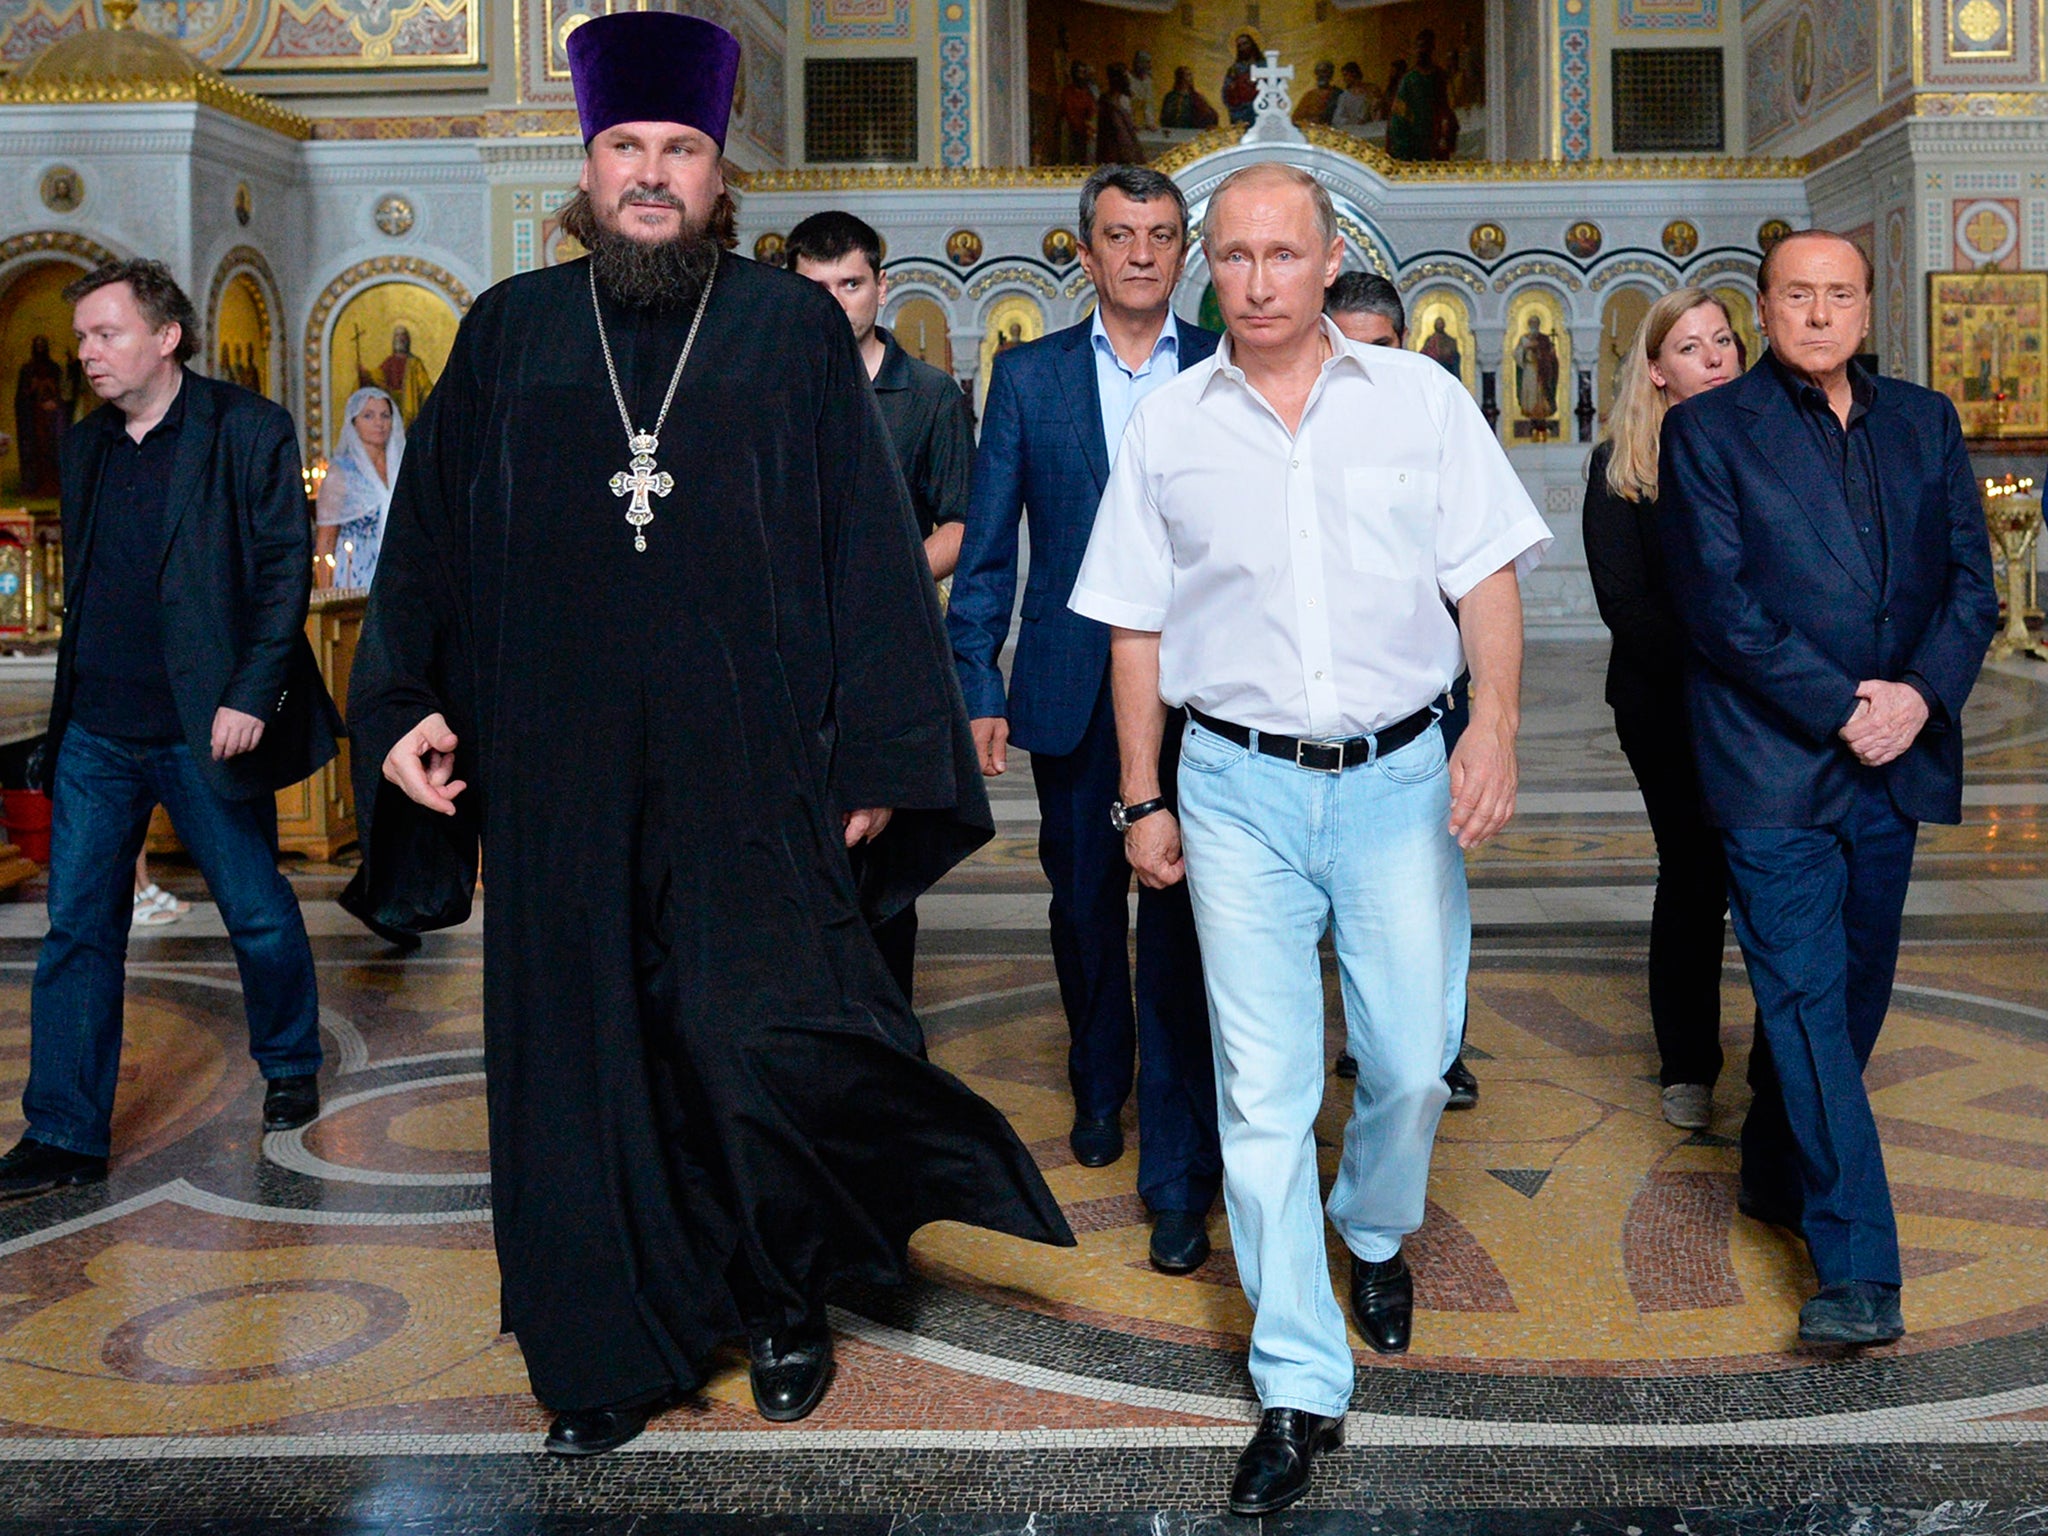 Russian President Vladimir Putin, second right, and former Italian Prime Minister Silvio Berlusconi, right, walk in St. Vladimir's Cathedral as they visit the ancient Greek colony of Chersonesus, major archaeological site in Crimea, outside Sevastopol, Crimea